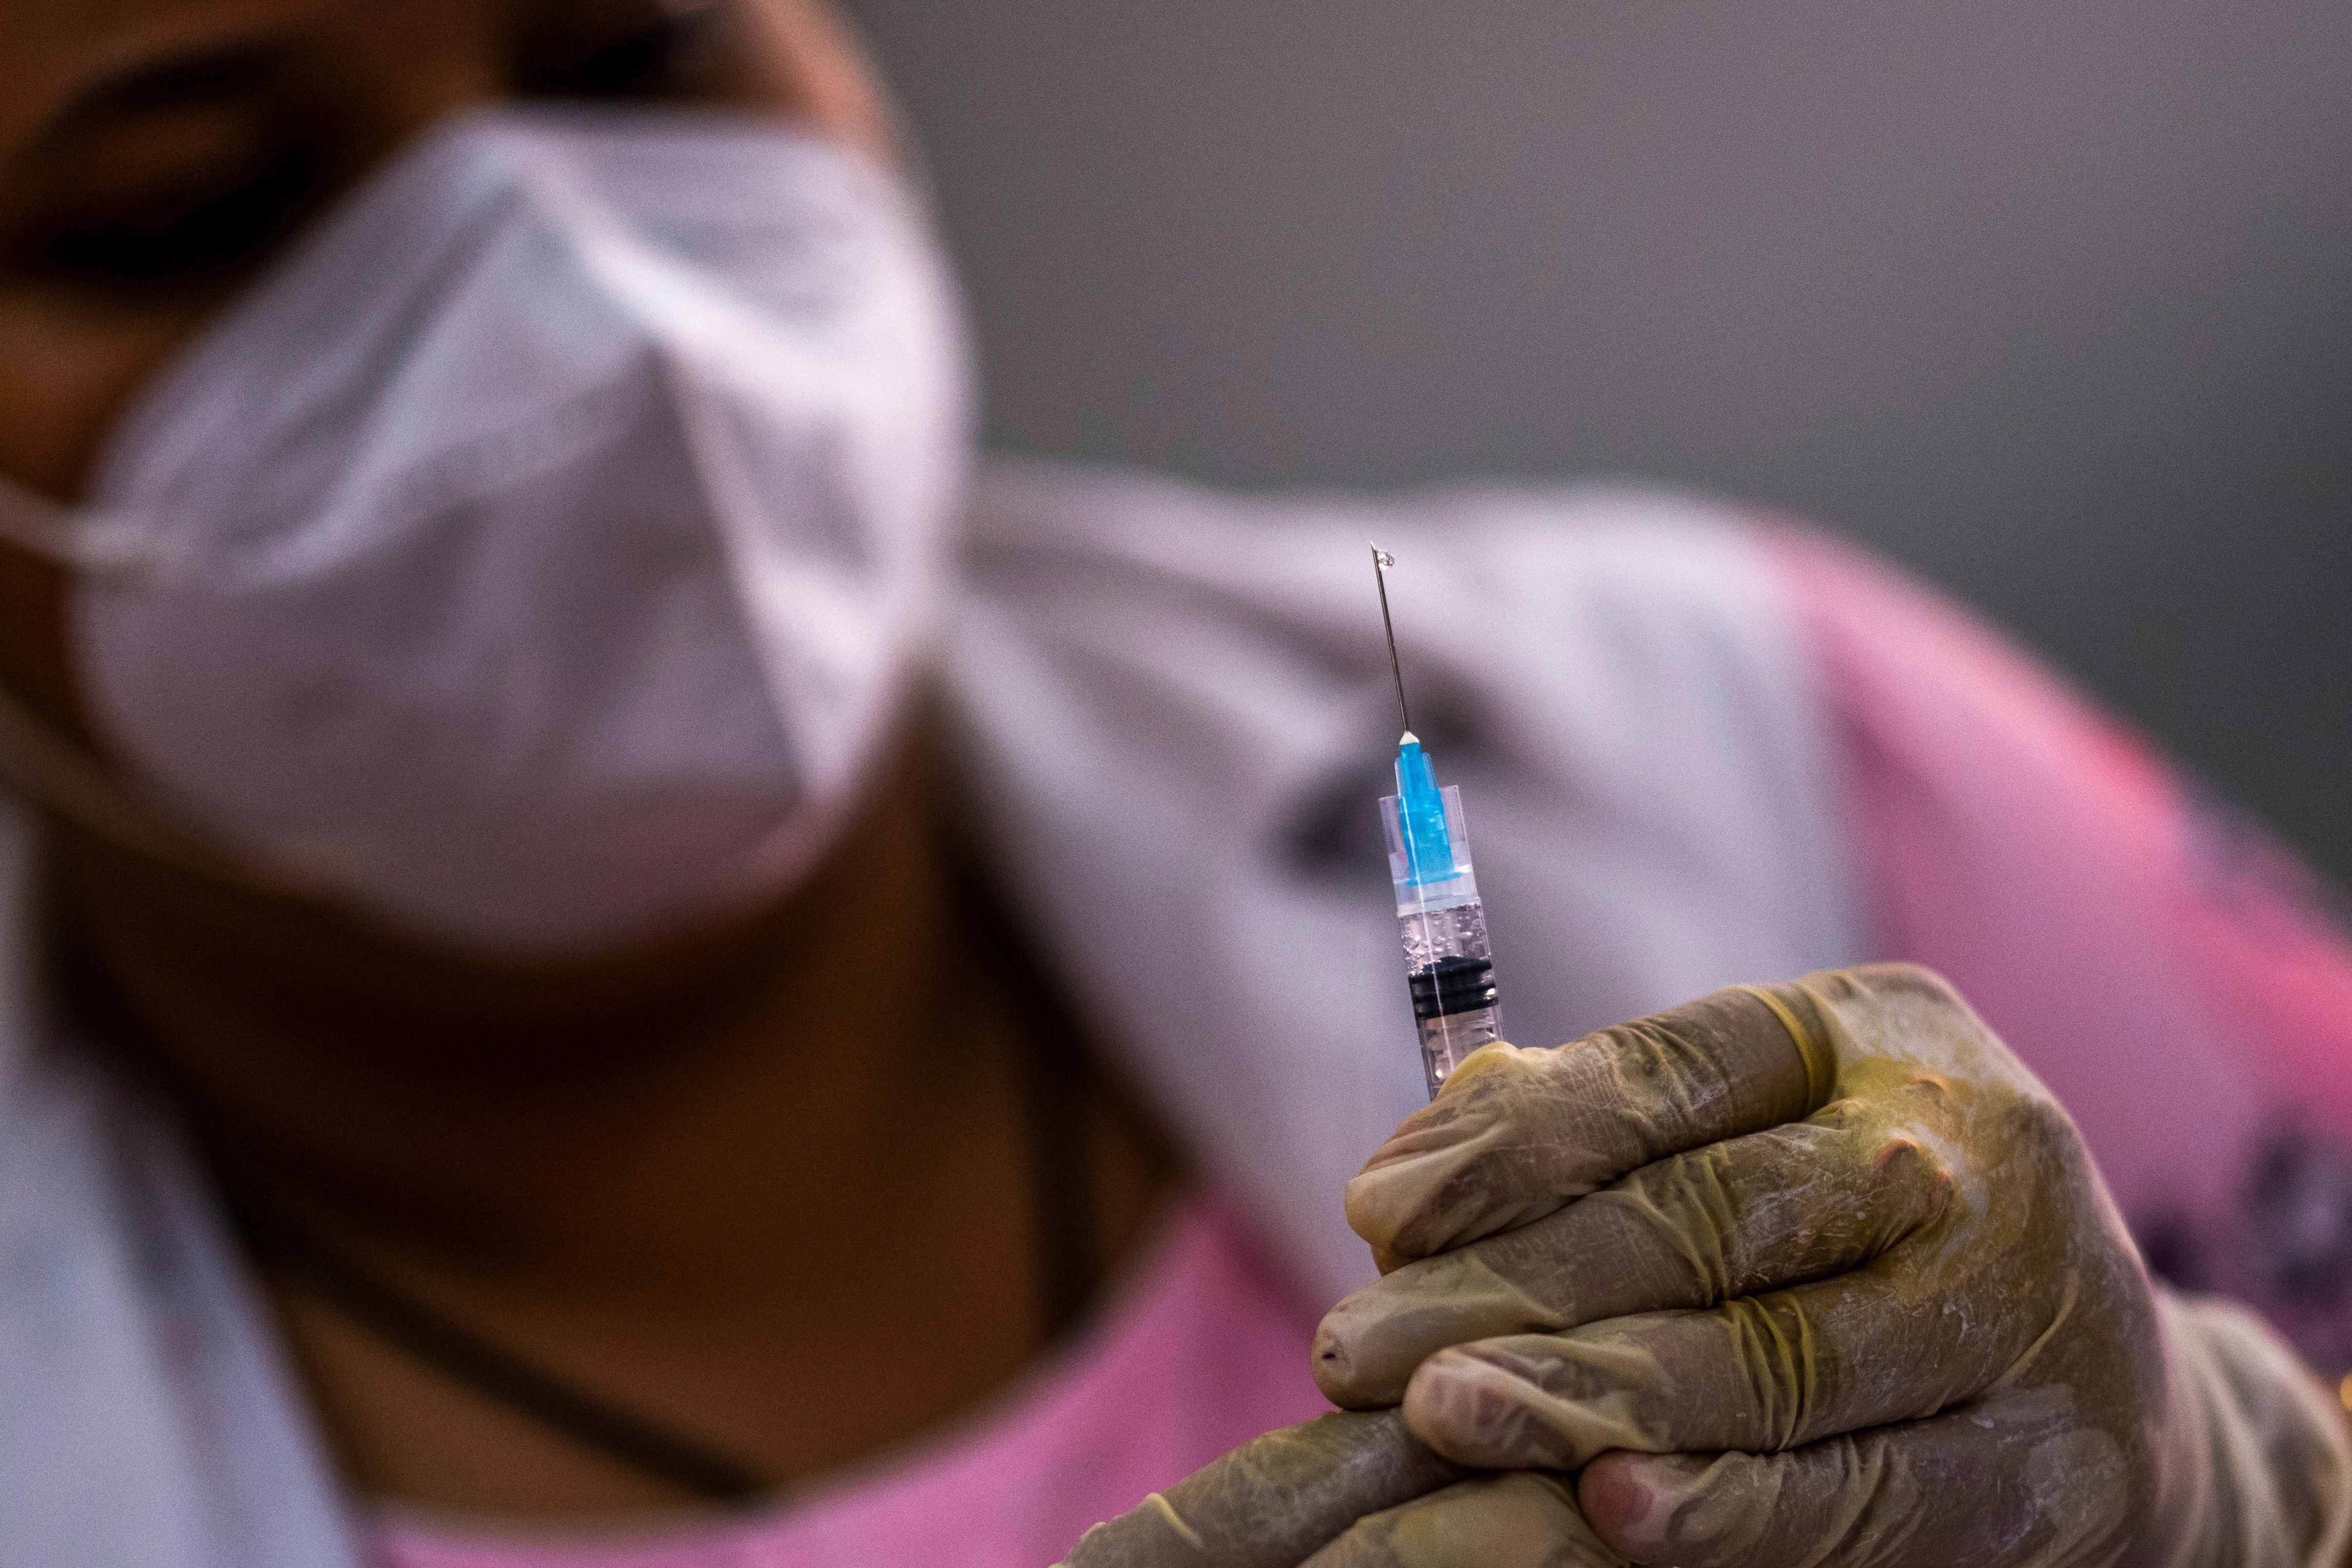 File: A health worker prepares to inoculate with a dose of a Covid-19 vaccine in Delhi on 3 May, 2021